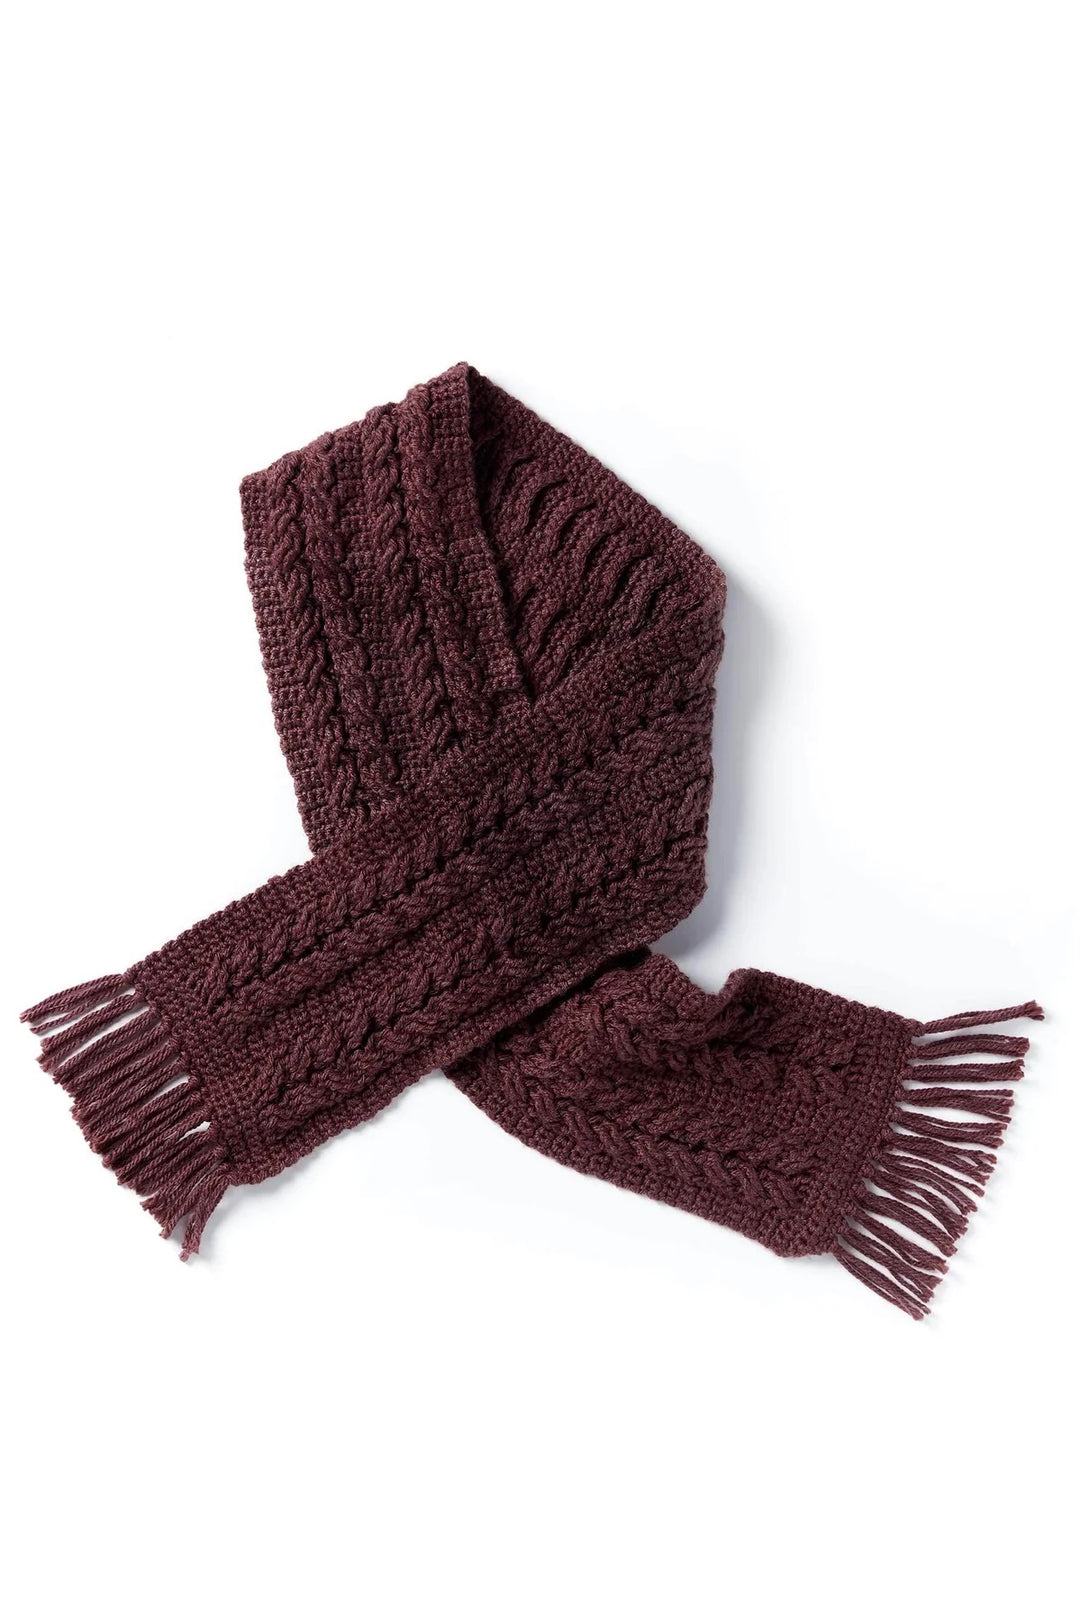 Free Crochet Cable Scarf Pattern